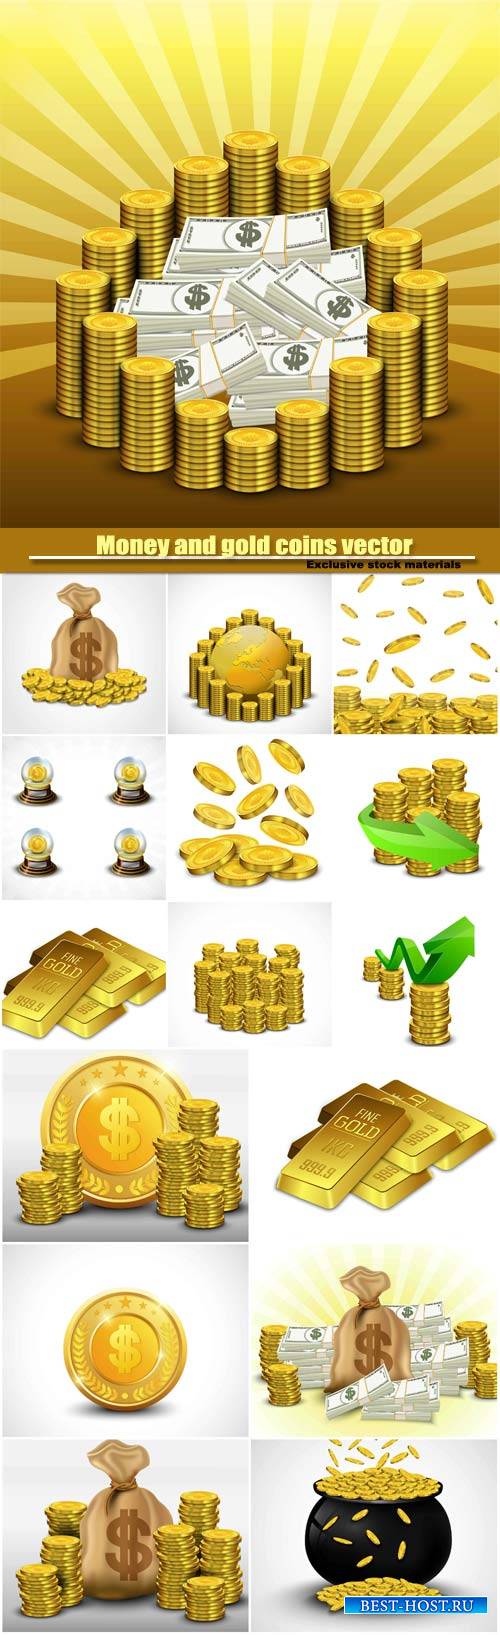 Money and gold coins vector